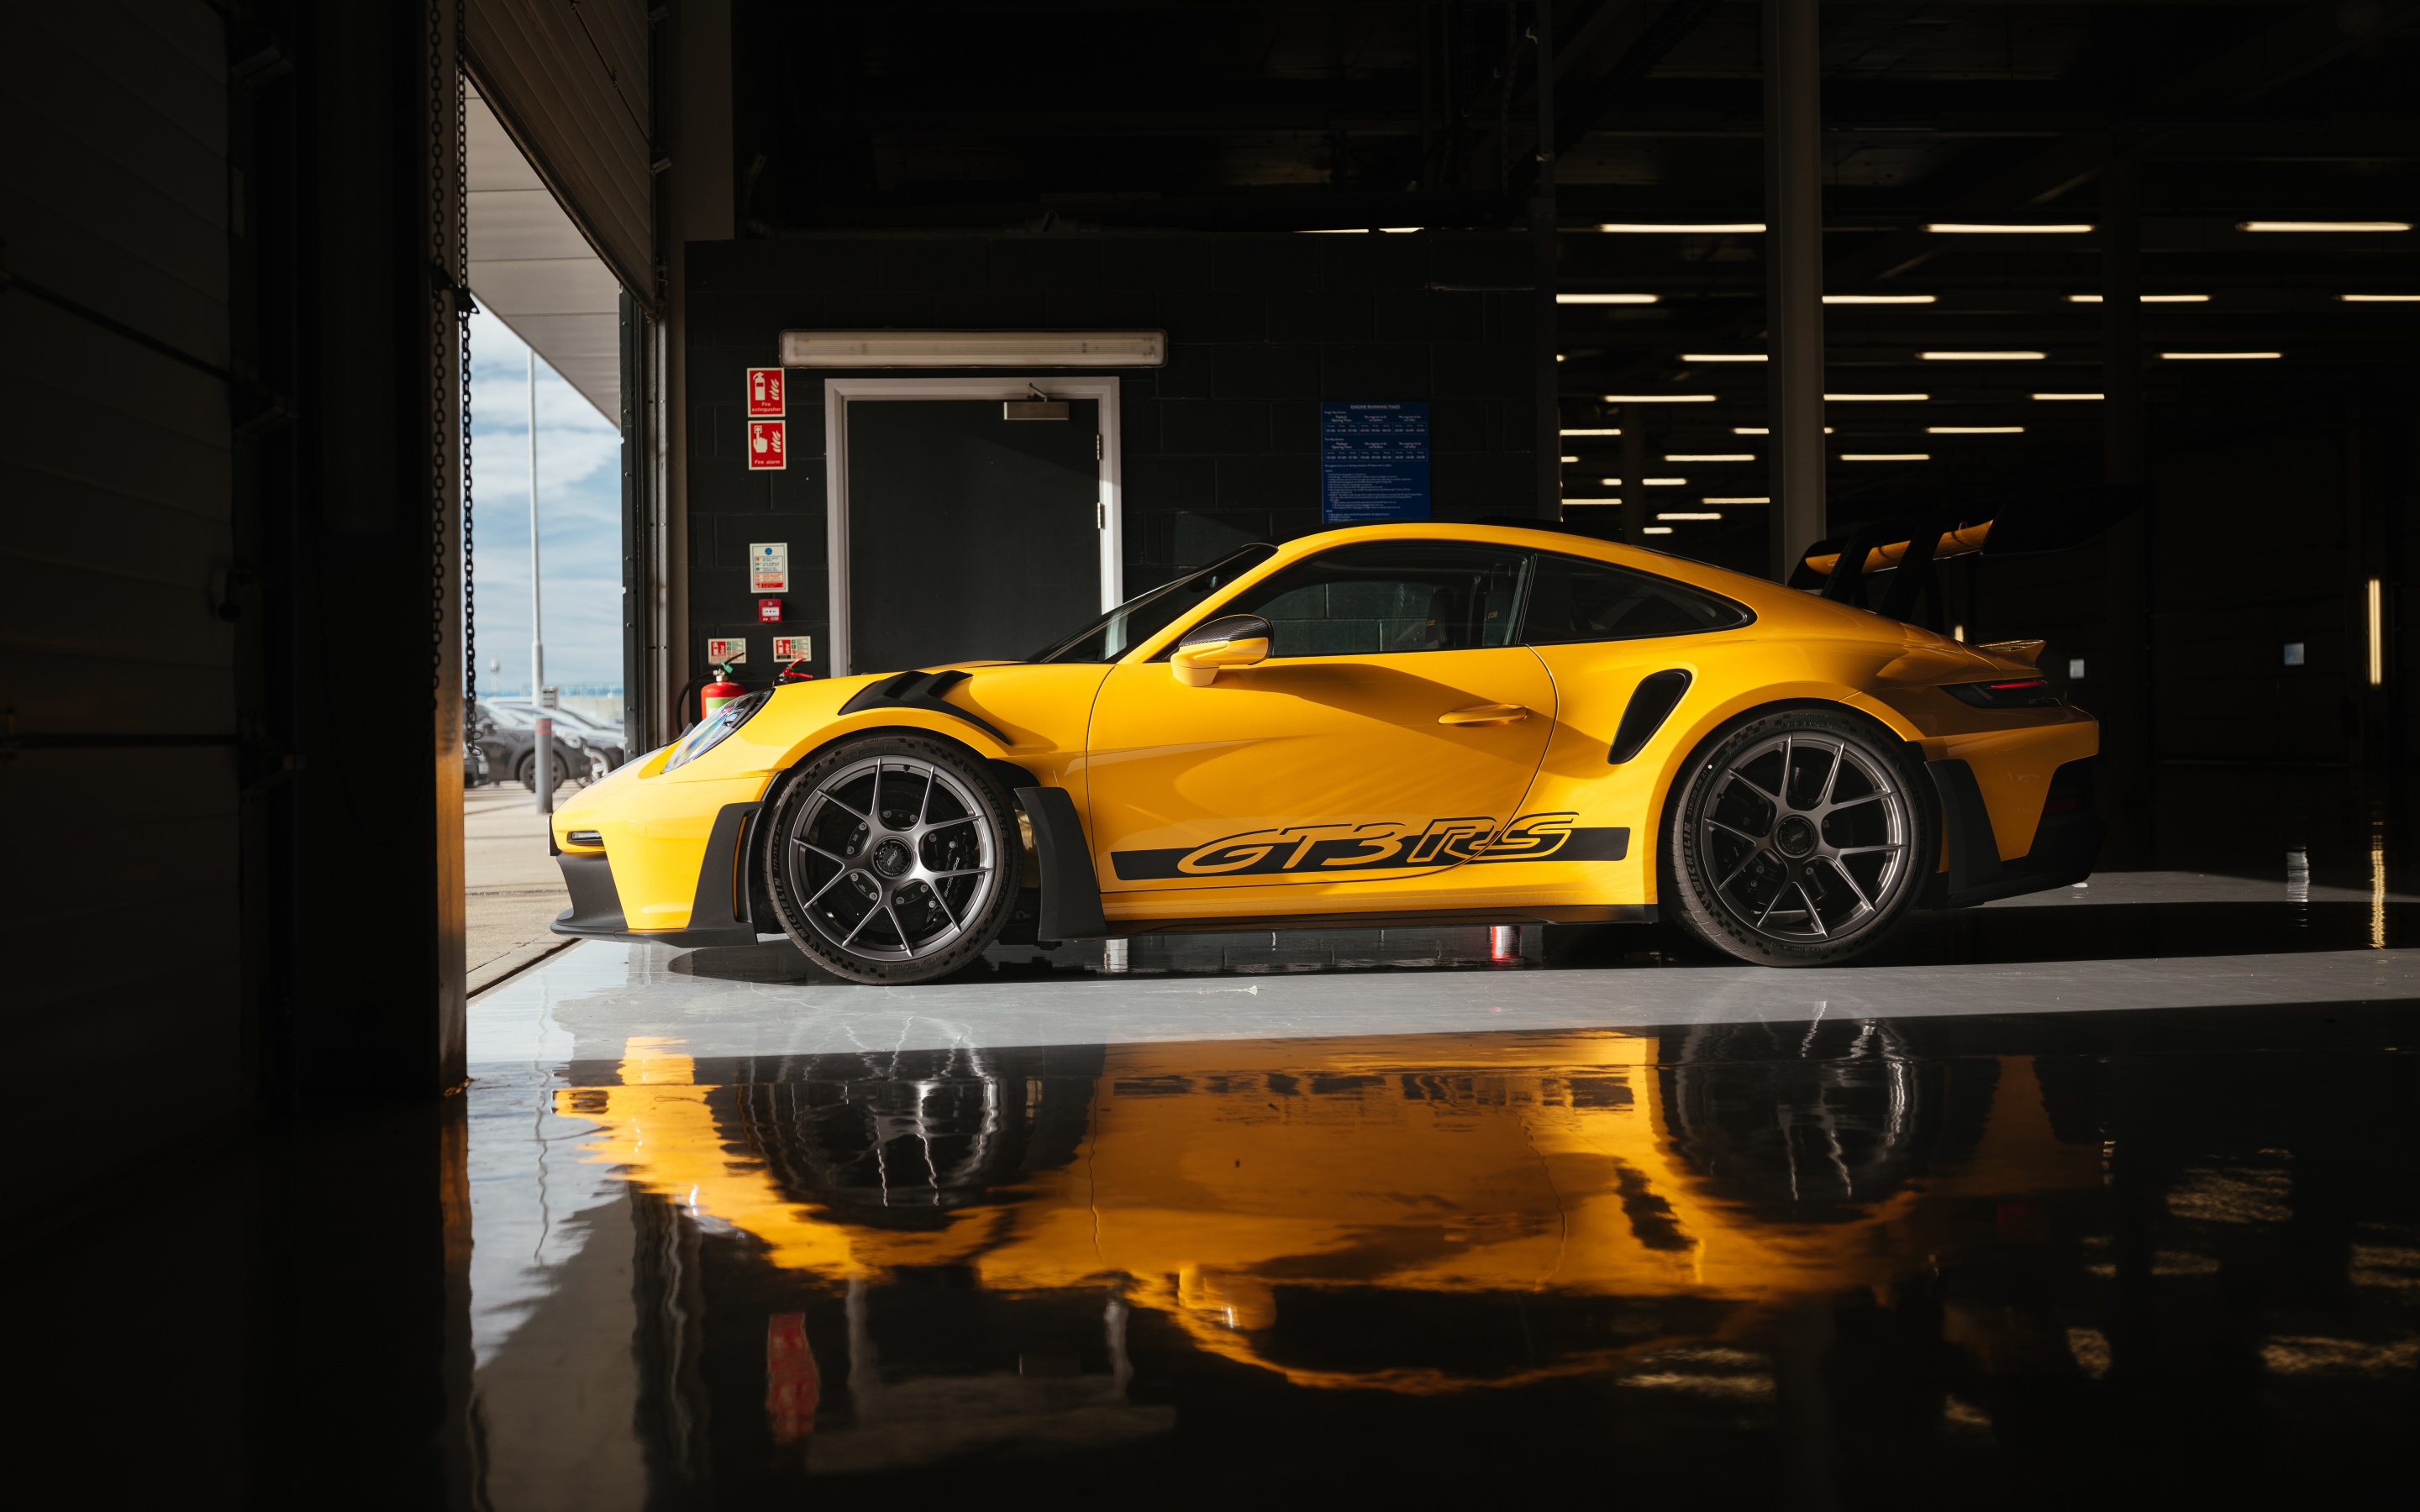 Download Porsche 911 Gt3 Rs wallpapers for mobile phone free Porsche  911 Gt3 Rs HD pictures